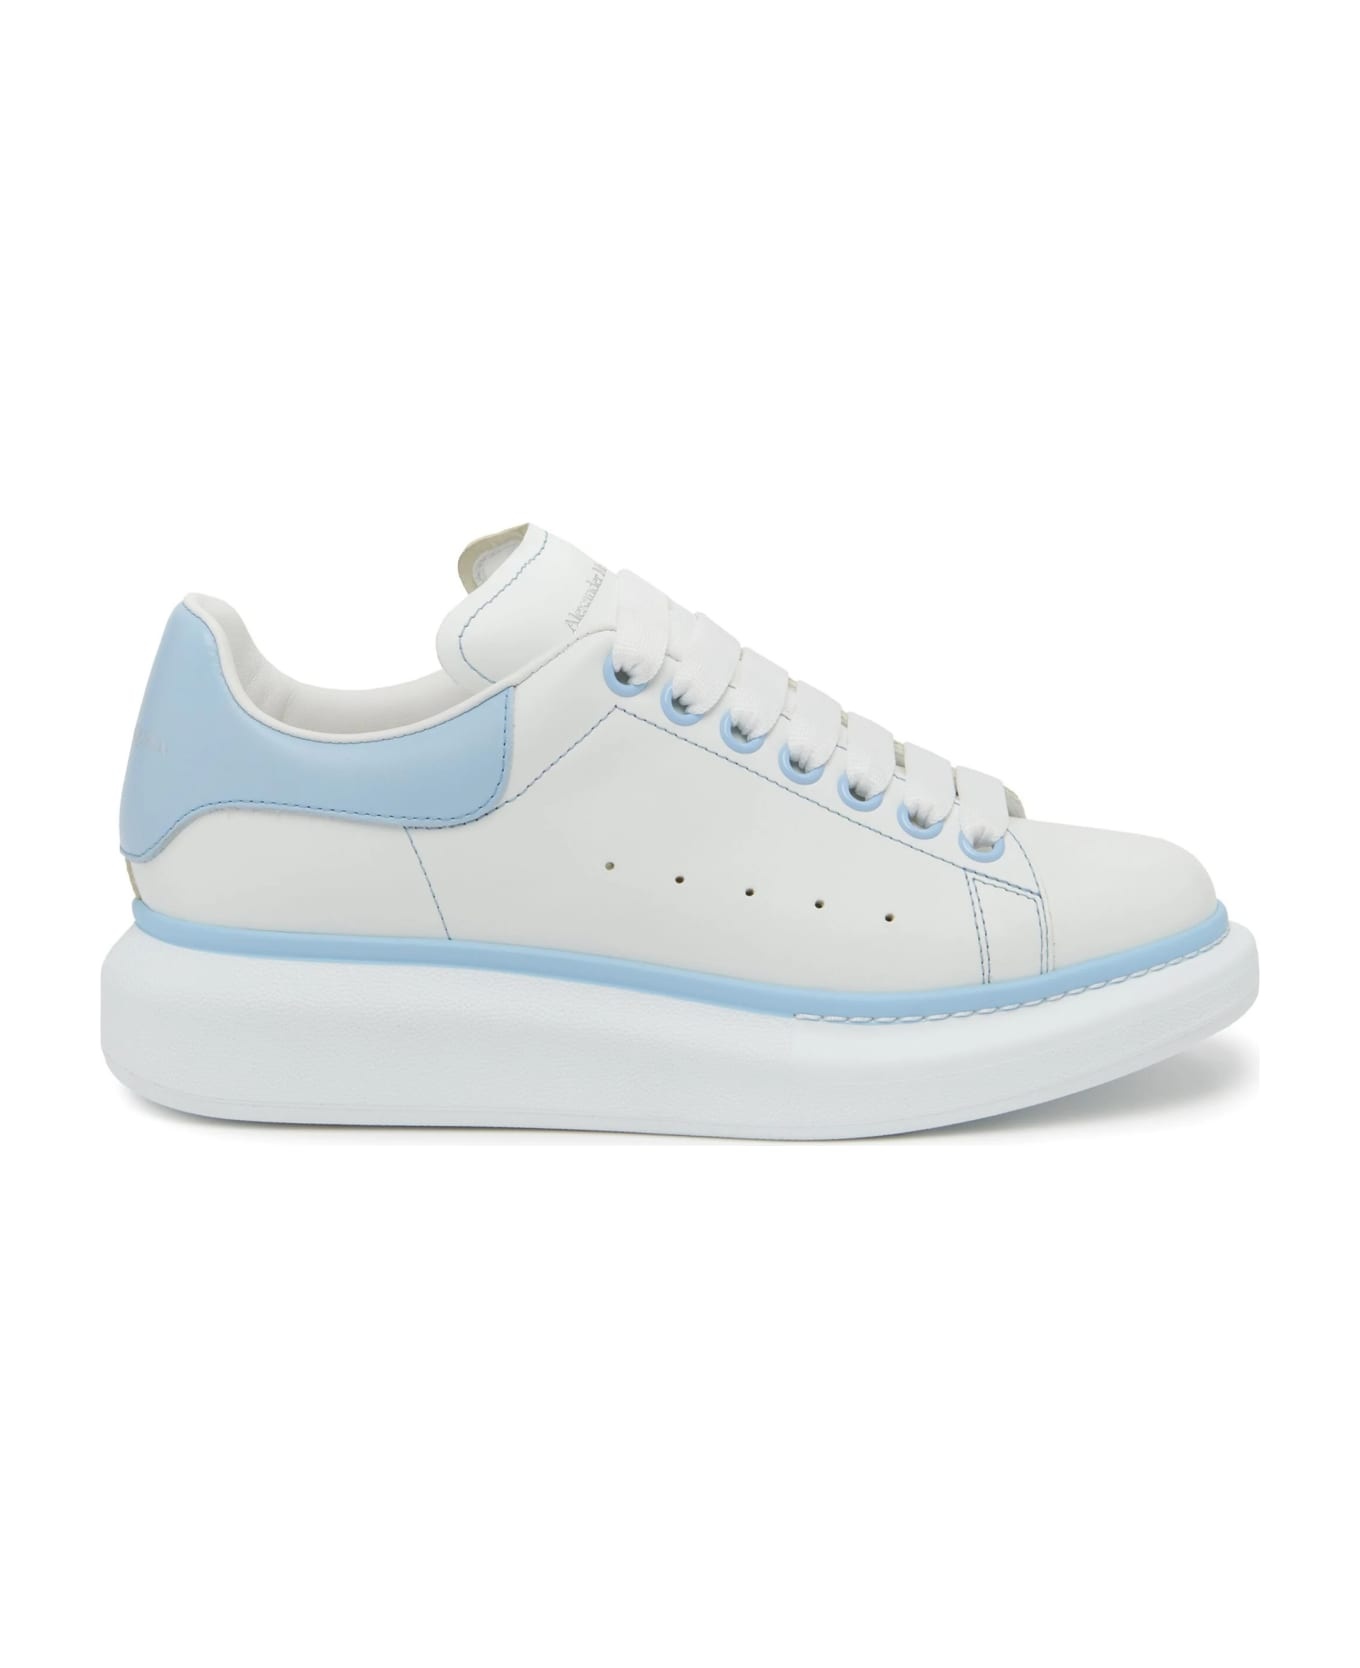 White Oversized Sneakers With Powder Blue Details - 1